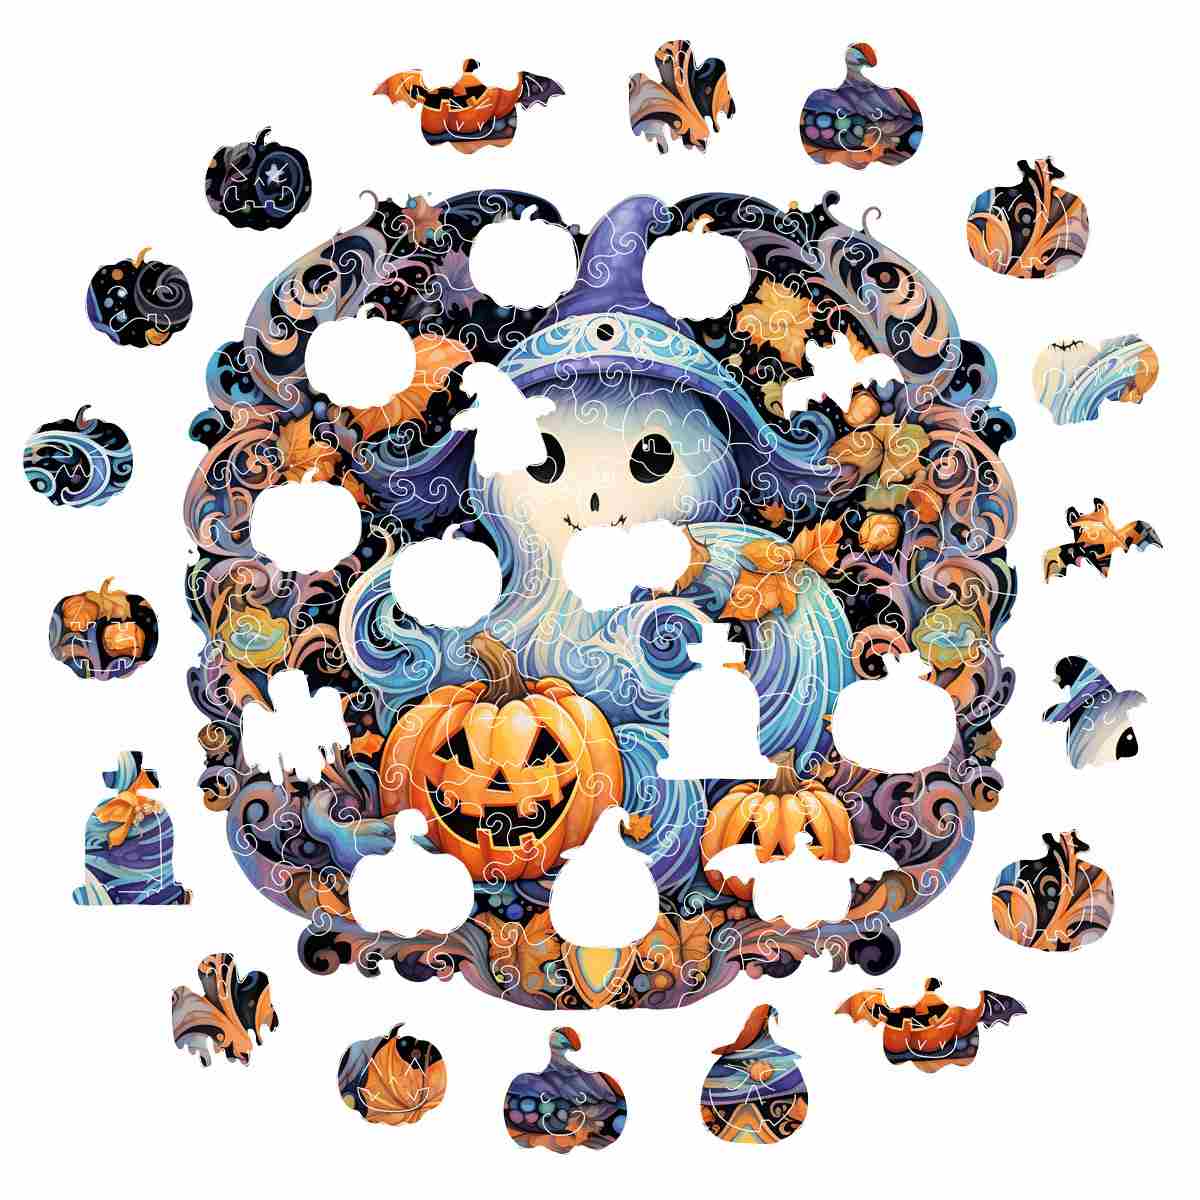 Animal Jigsaw Puzzle > Wooden Jigsaw Puzzle > Jigsaw Puzzle Halloween Ghost - Jigsaw Puzzle